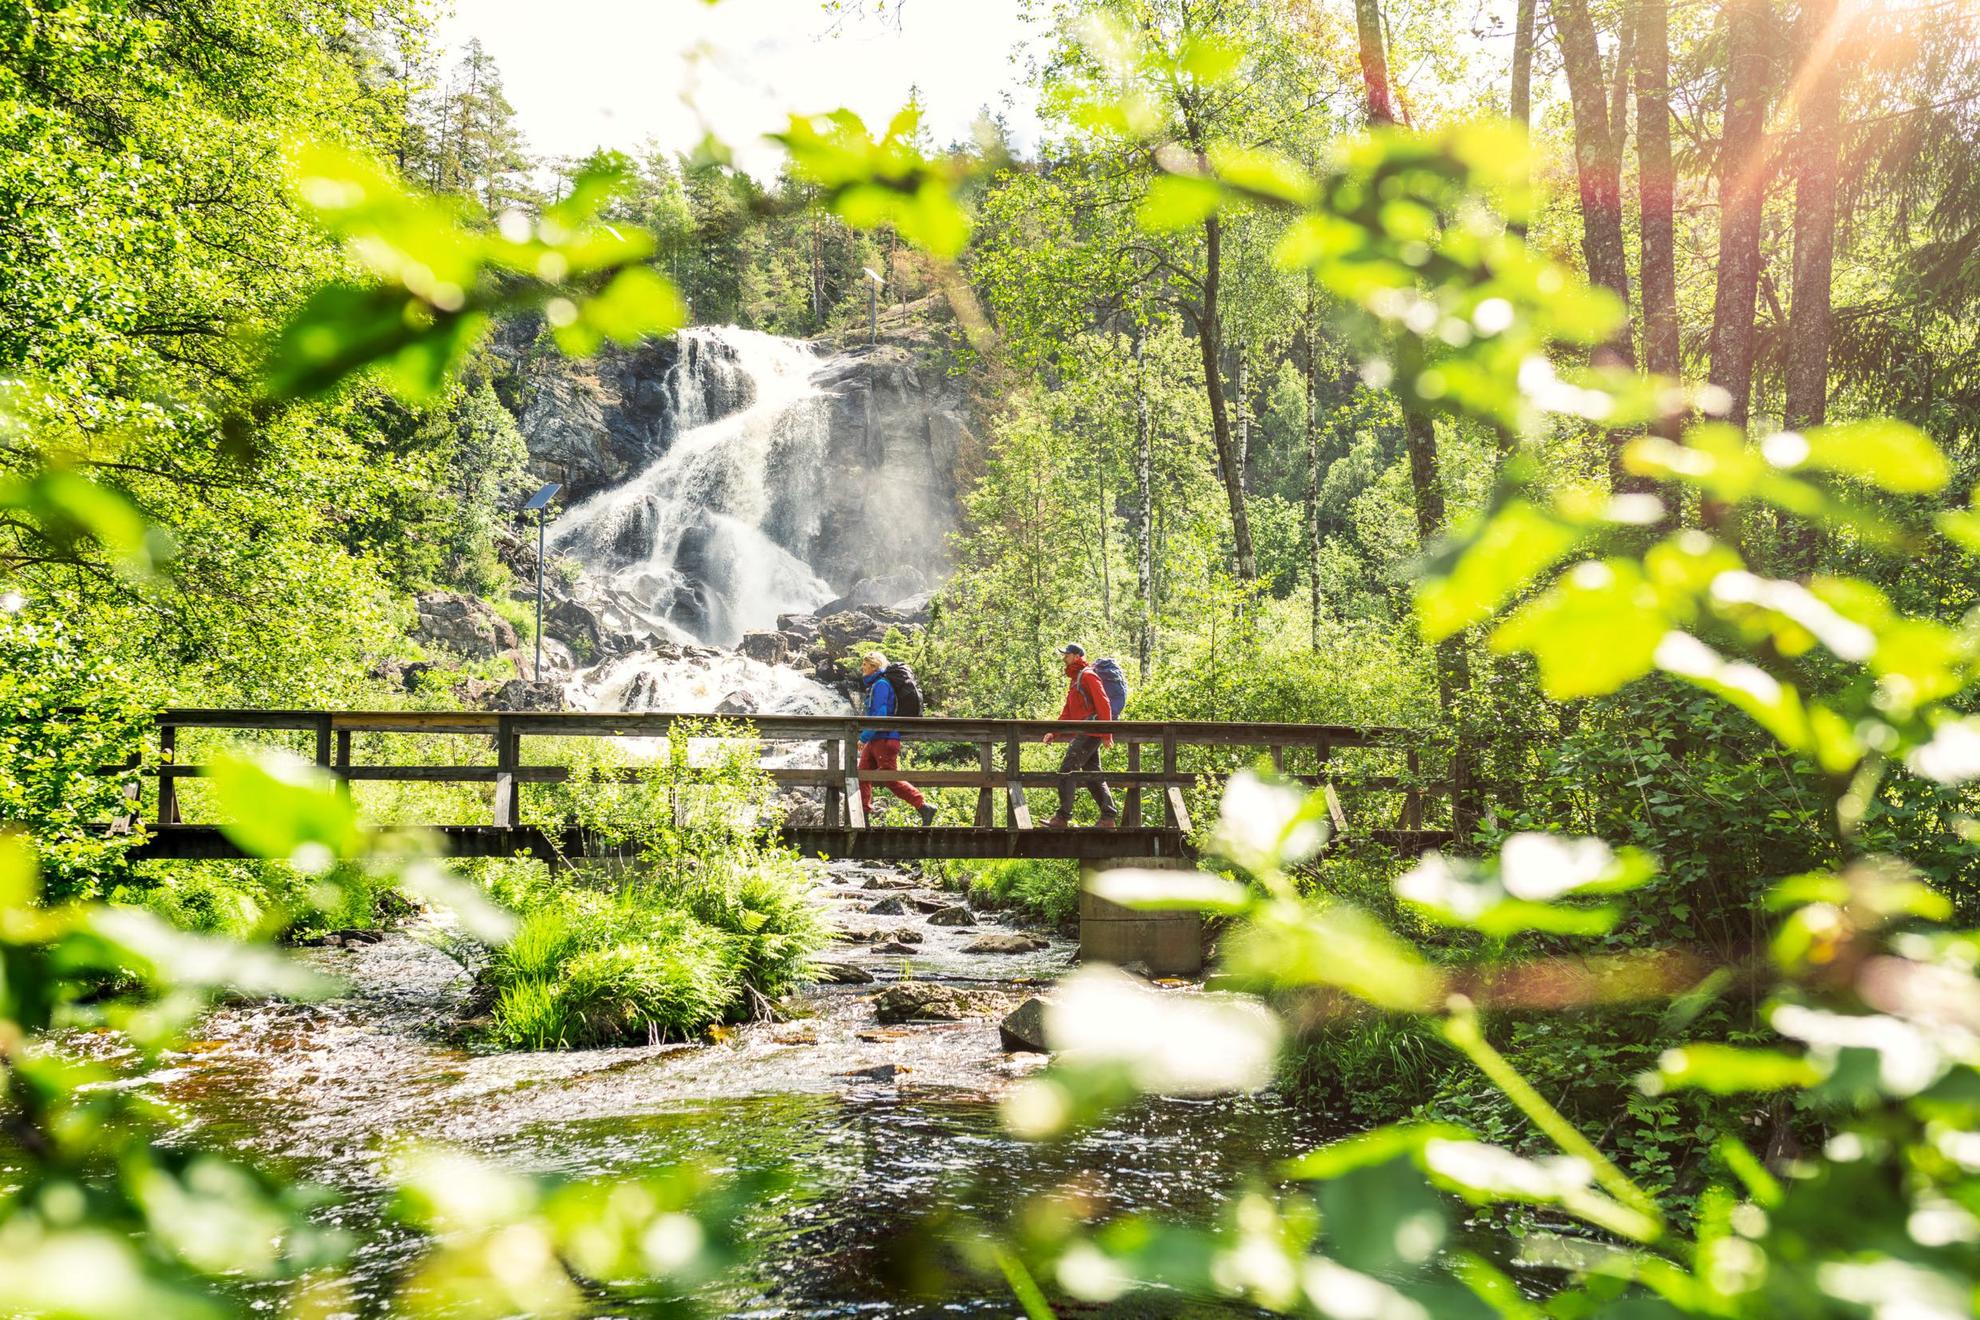 Two people walking over a wooden bridge in a forest. There is a waterfall in the background.